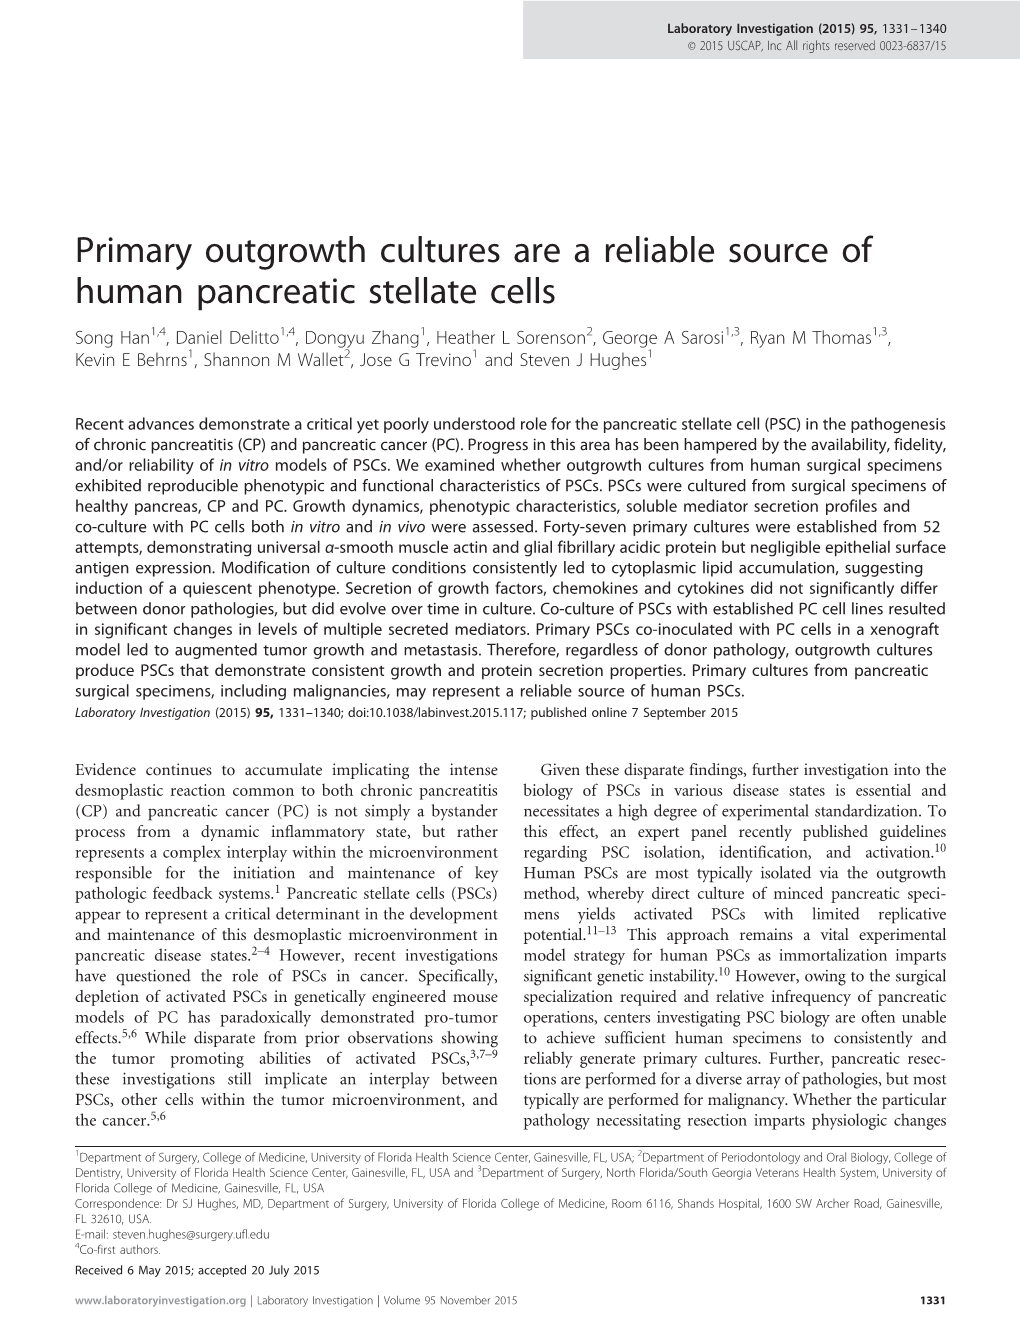 Primary Outgrowth Cultures Are a Reliable Source of Human Pancreatic